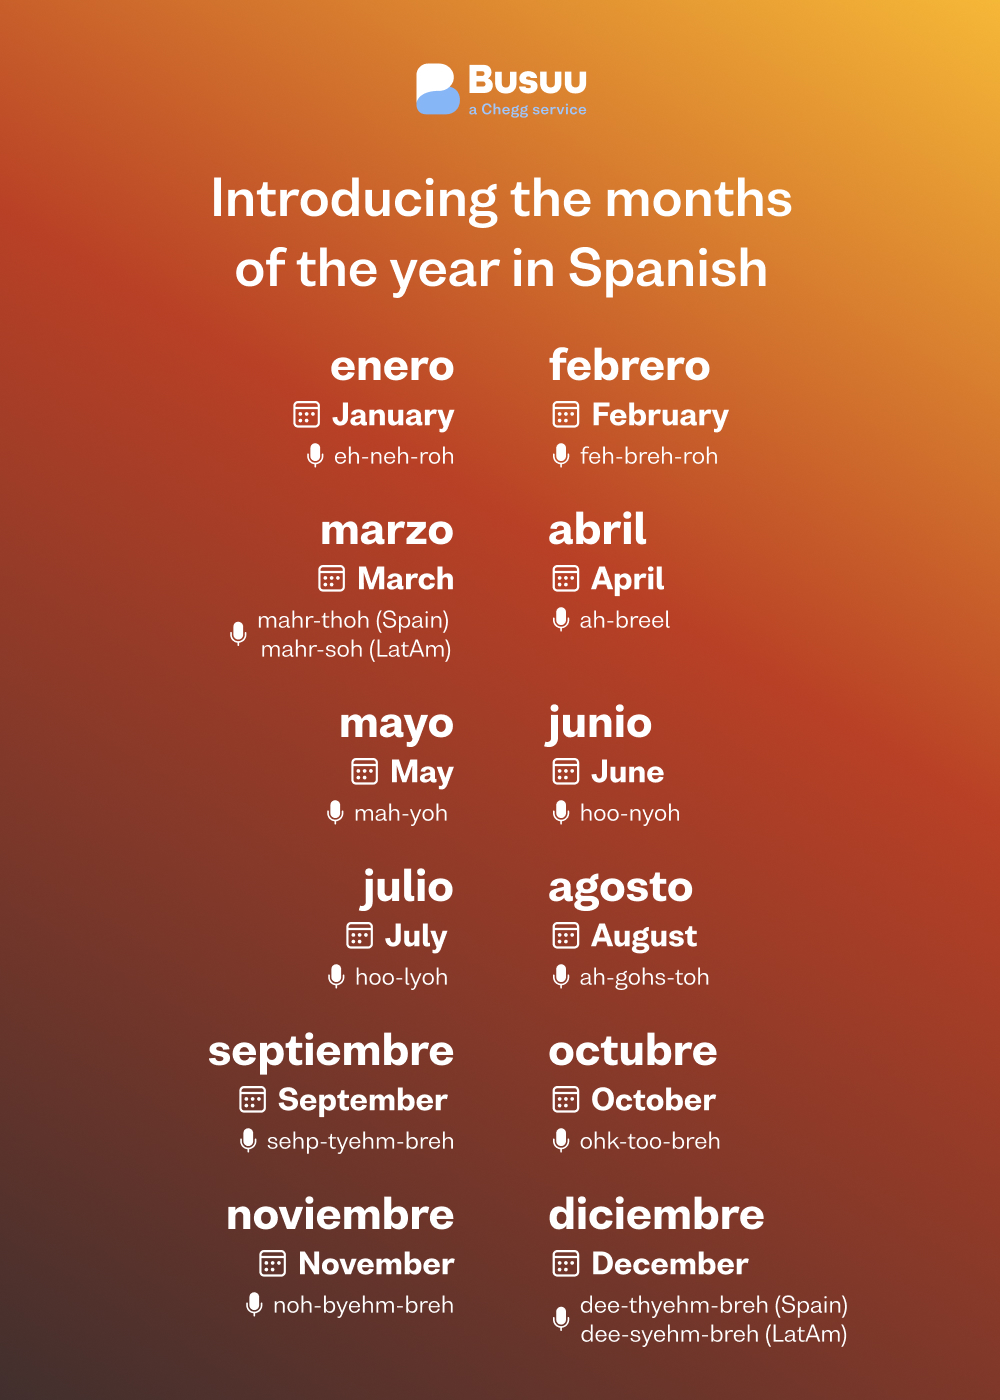 What Are The Months Of The Year In Spanish In Order